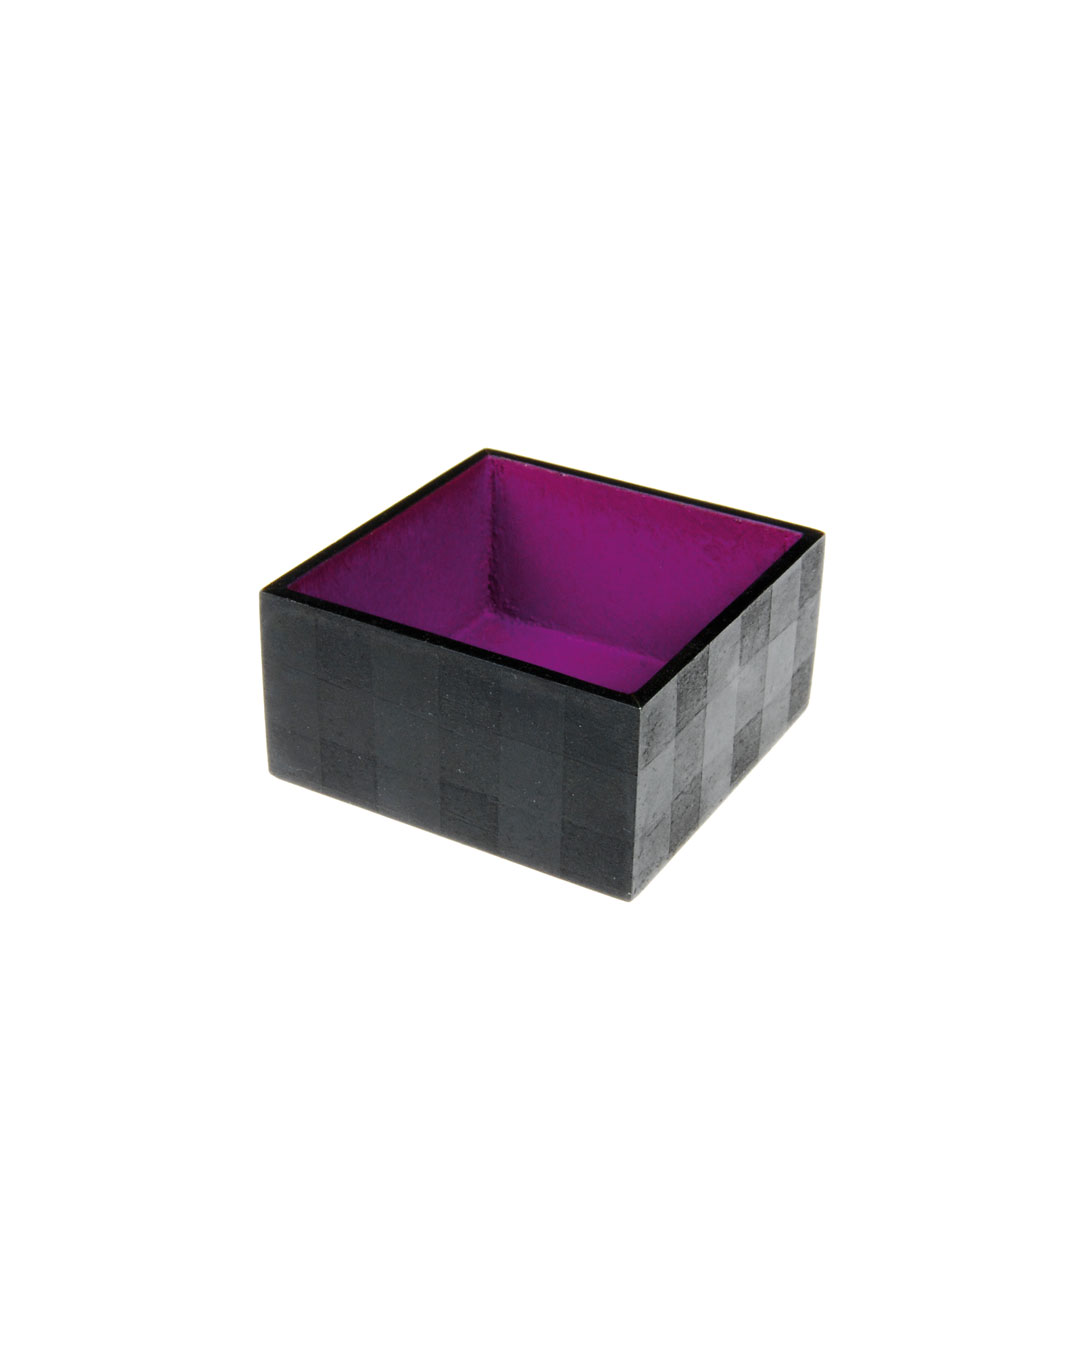 Tore Svensson, Box, 2009, brooch; etched and painted steel, 30 x 30 x 15 mm, €485